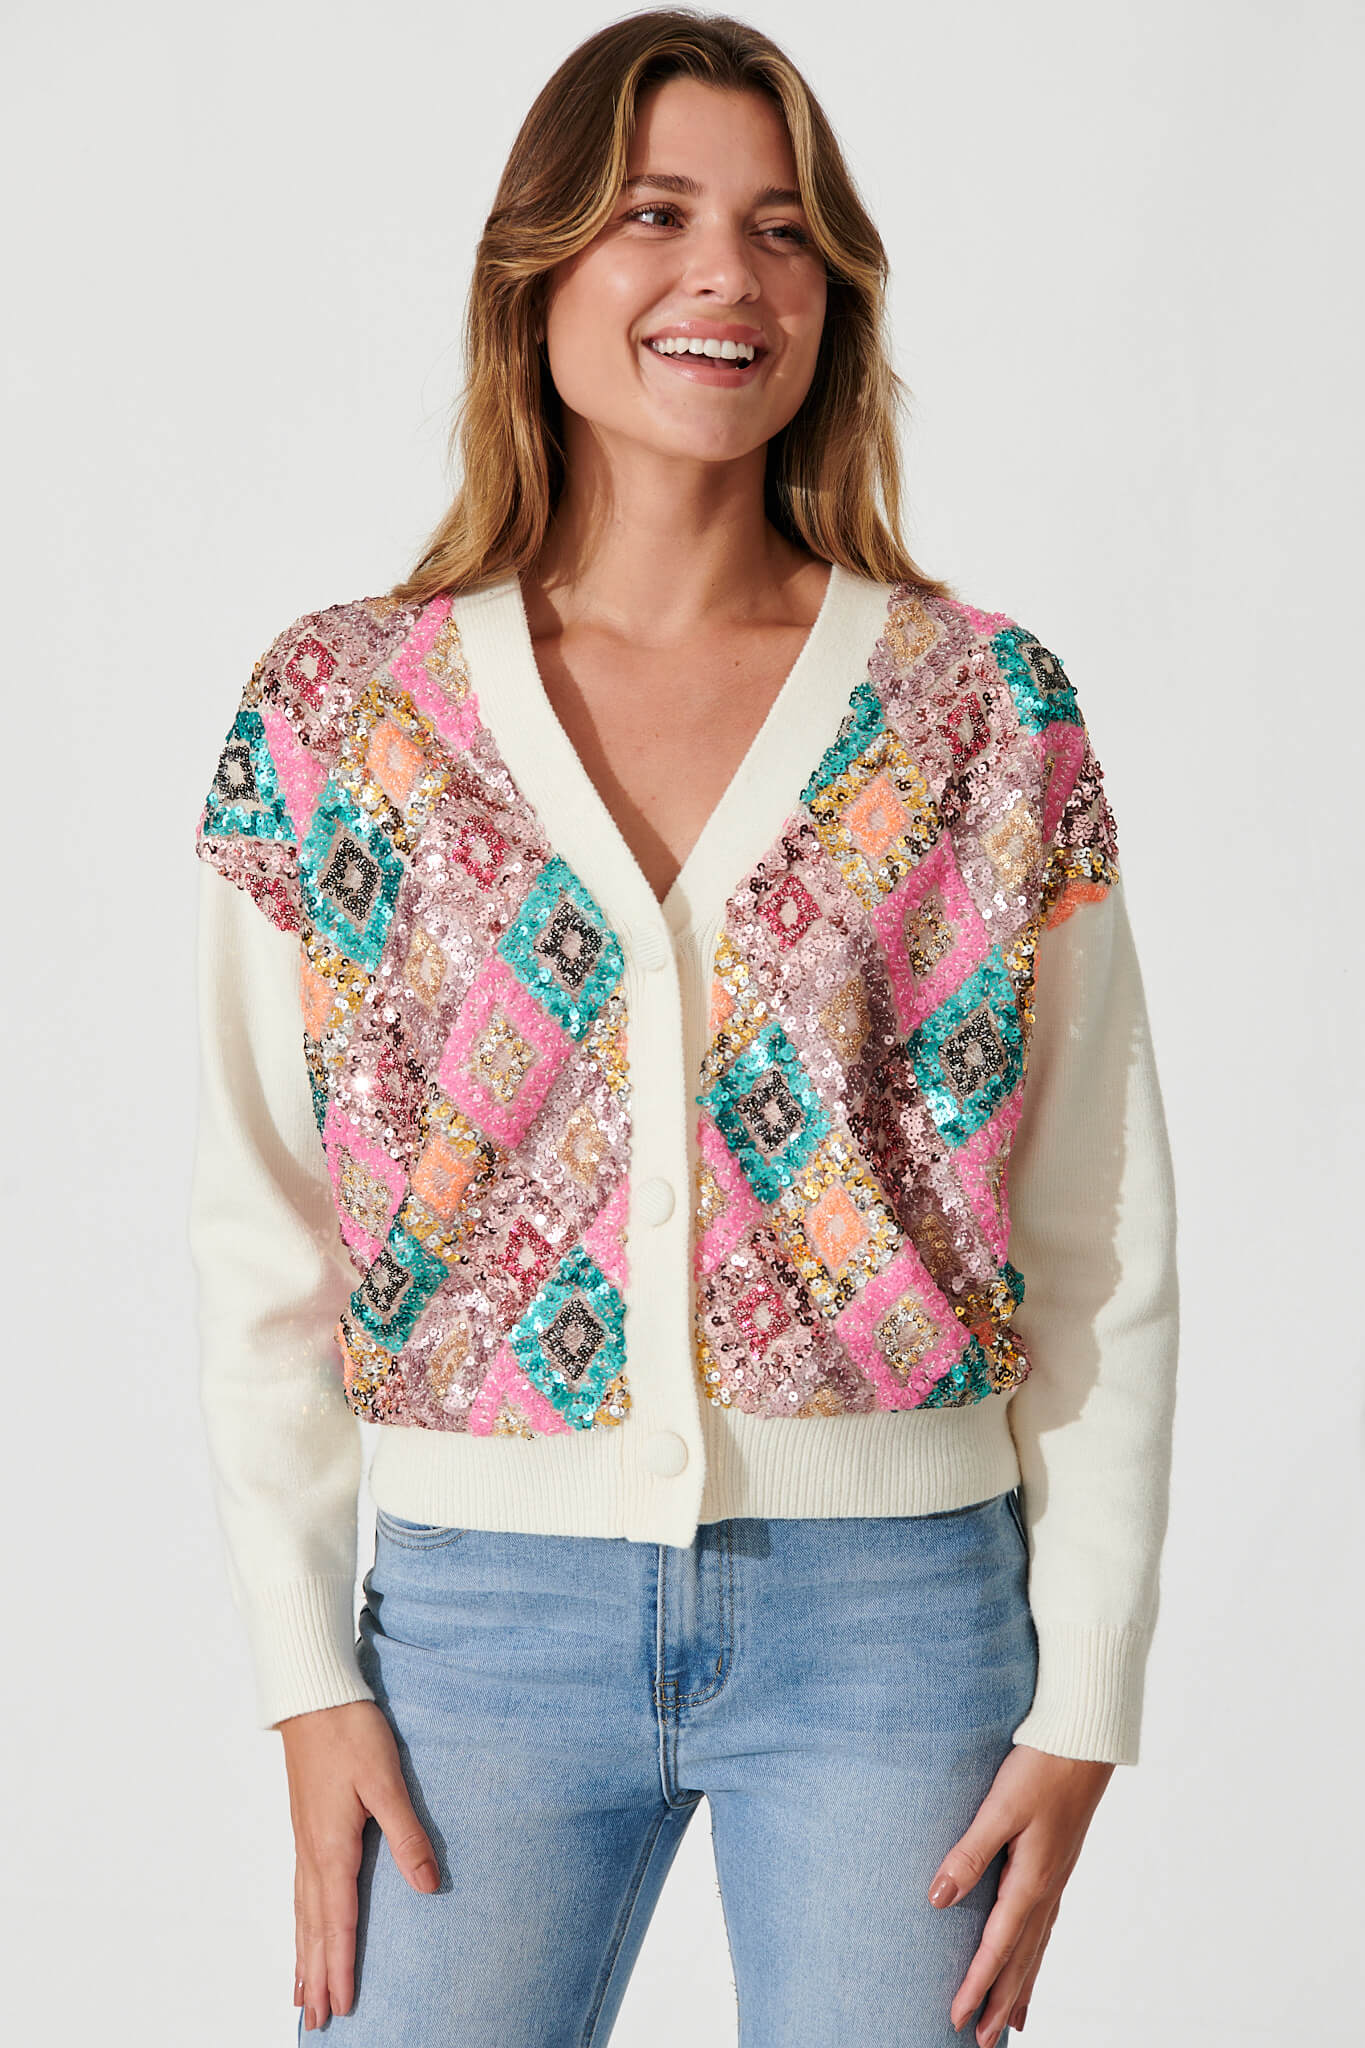 Pluto Knit Cardigan In Cream Multi Sequin Wool Blend - front